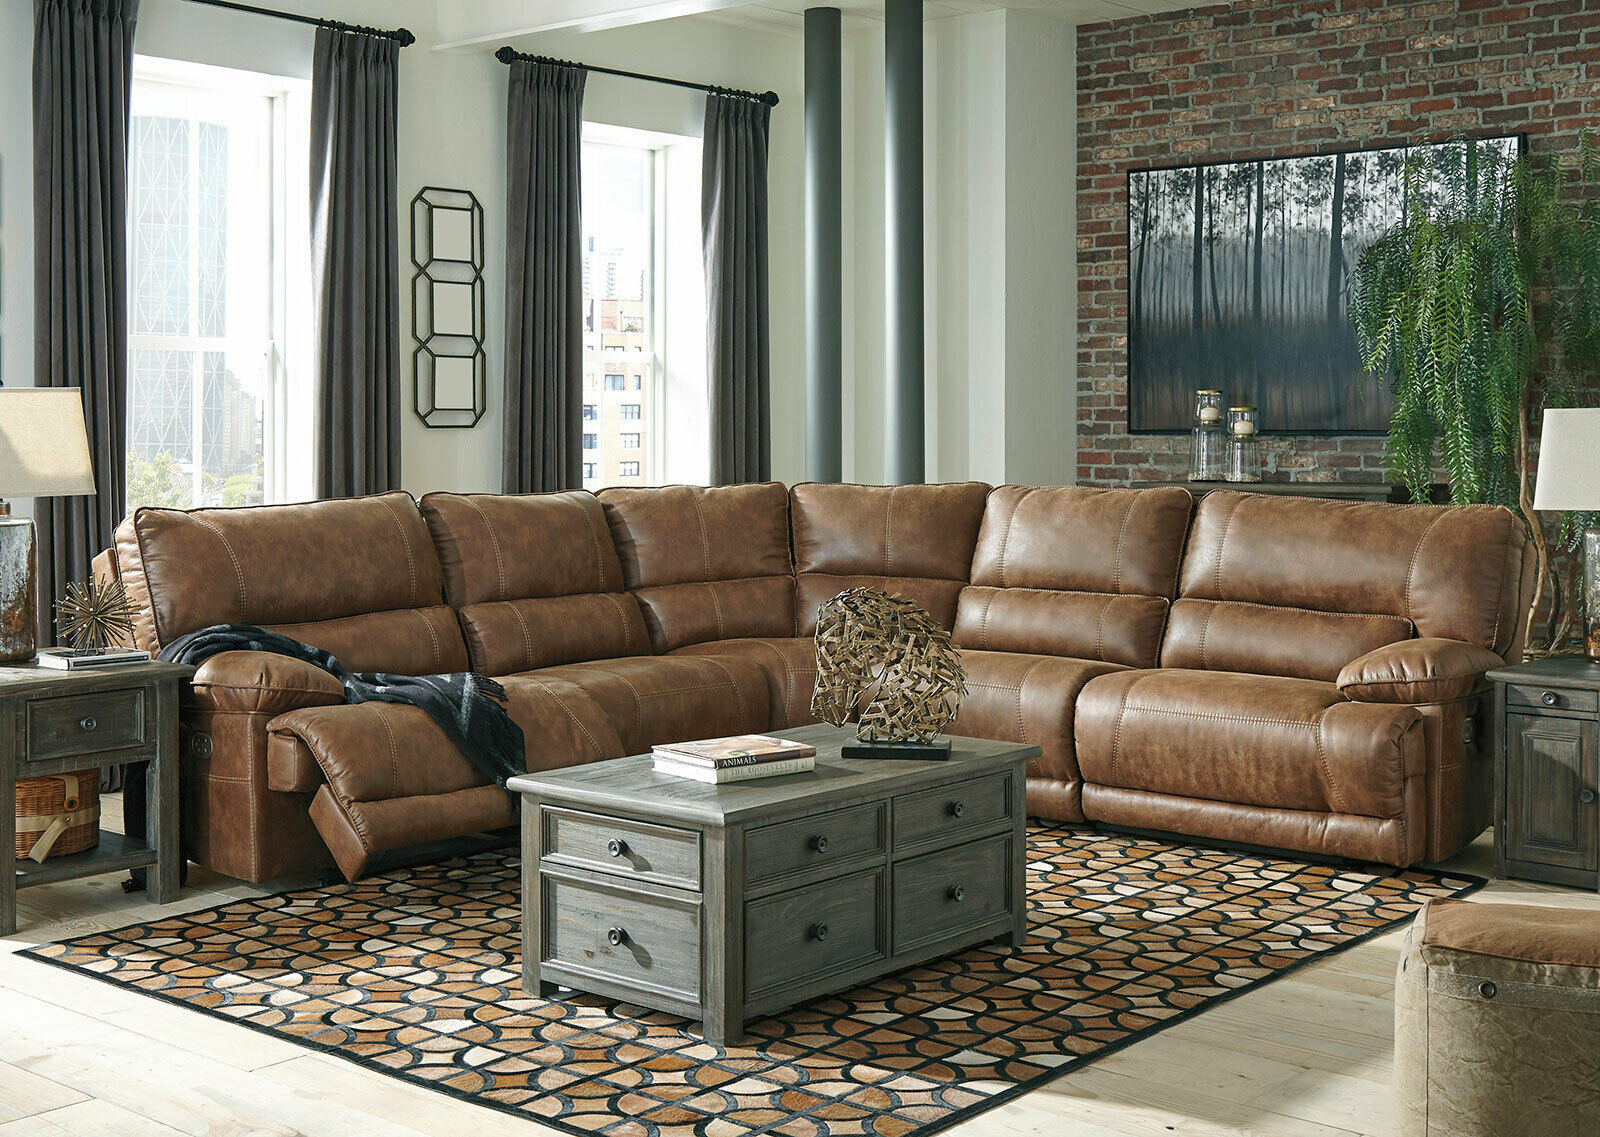 Tufted Brown Faux Leather Living Room Chairs